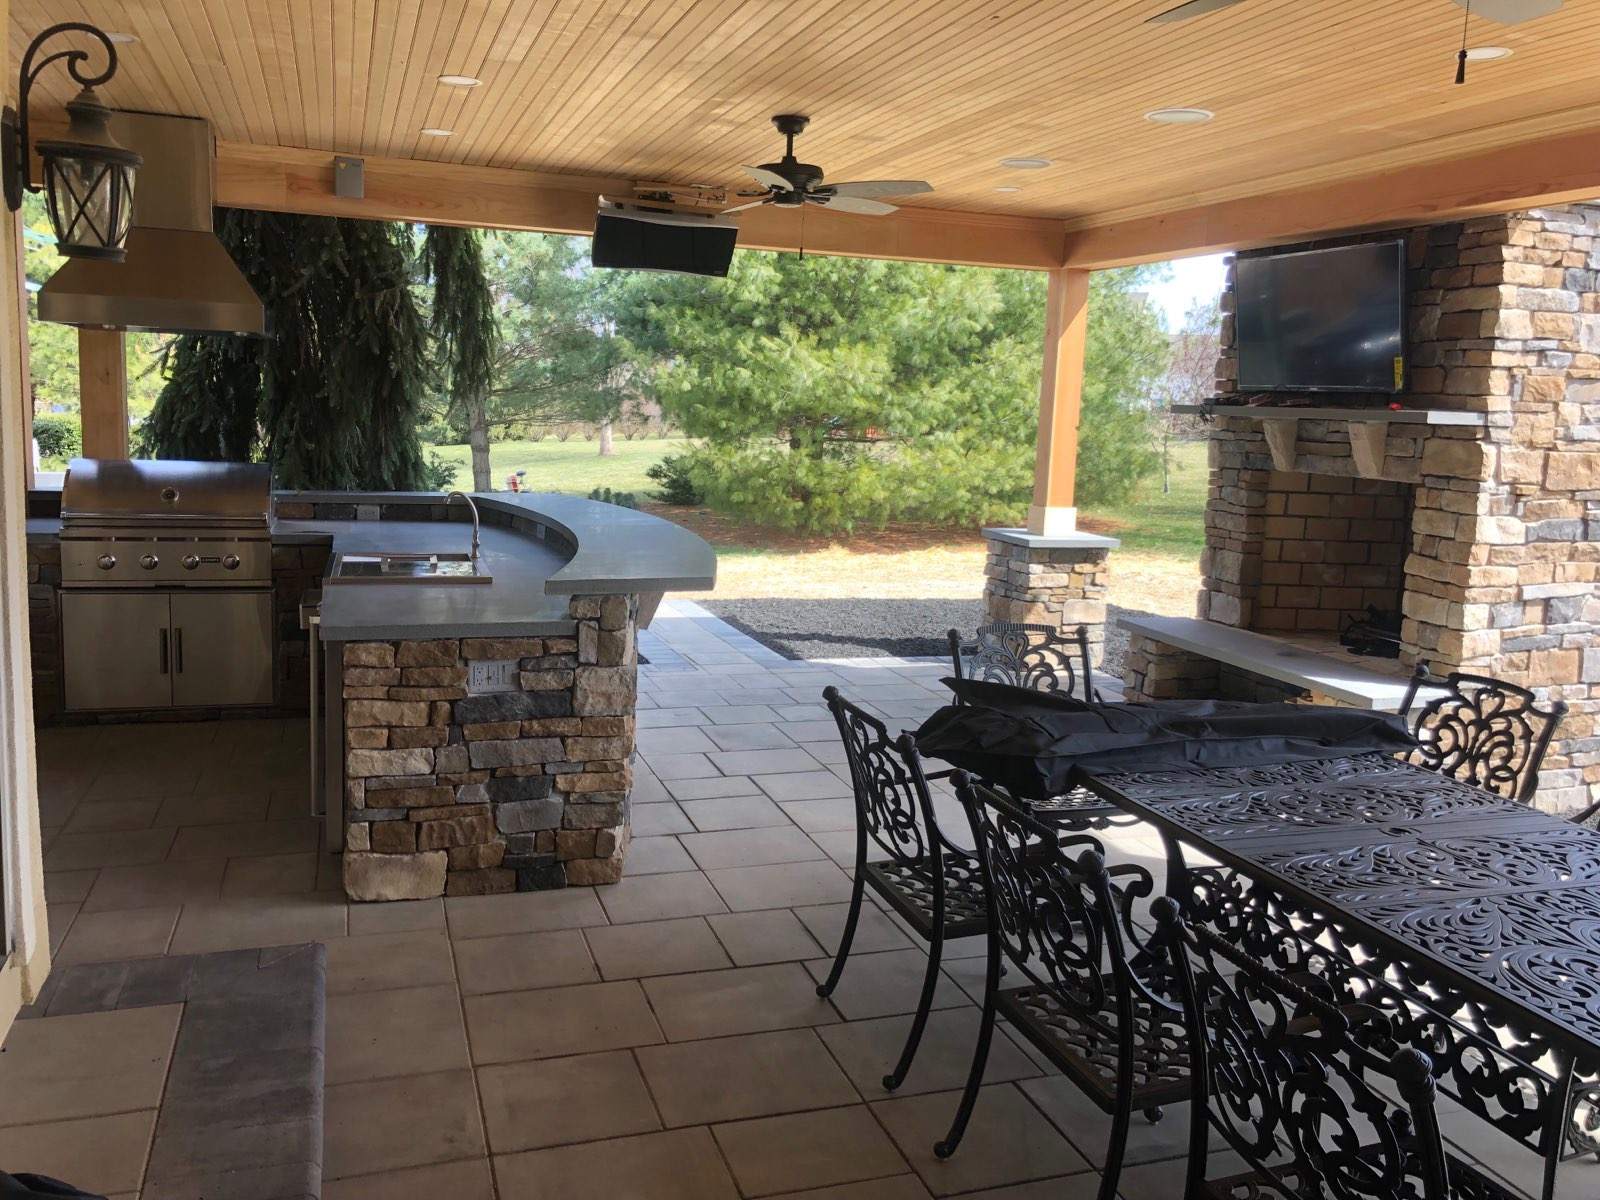 A patio with an outdoor kitchen and dining table.